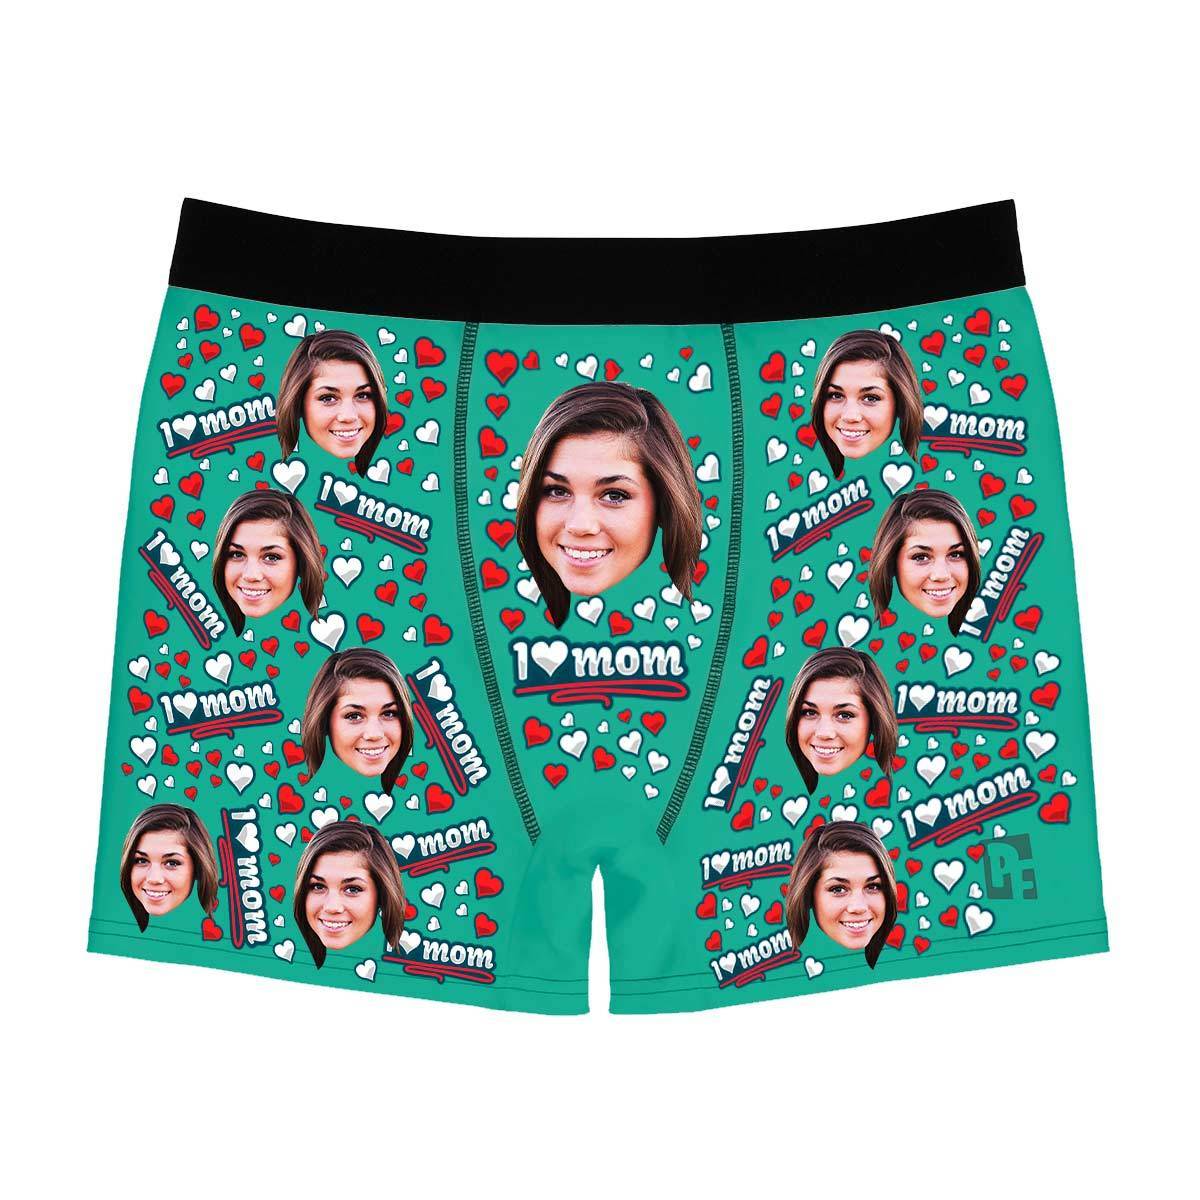 Mint Love mom men's boxer briefs personalized with photo printed on them